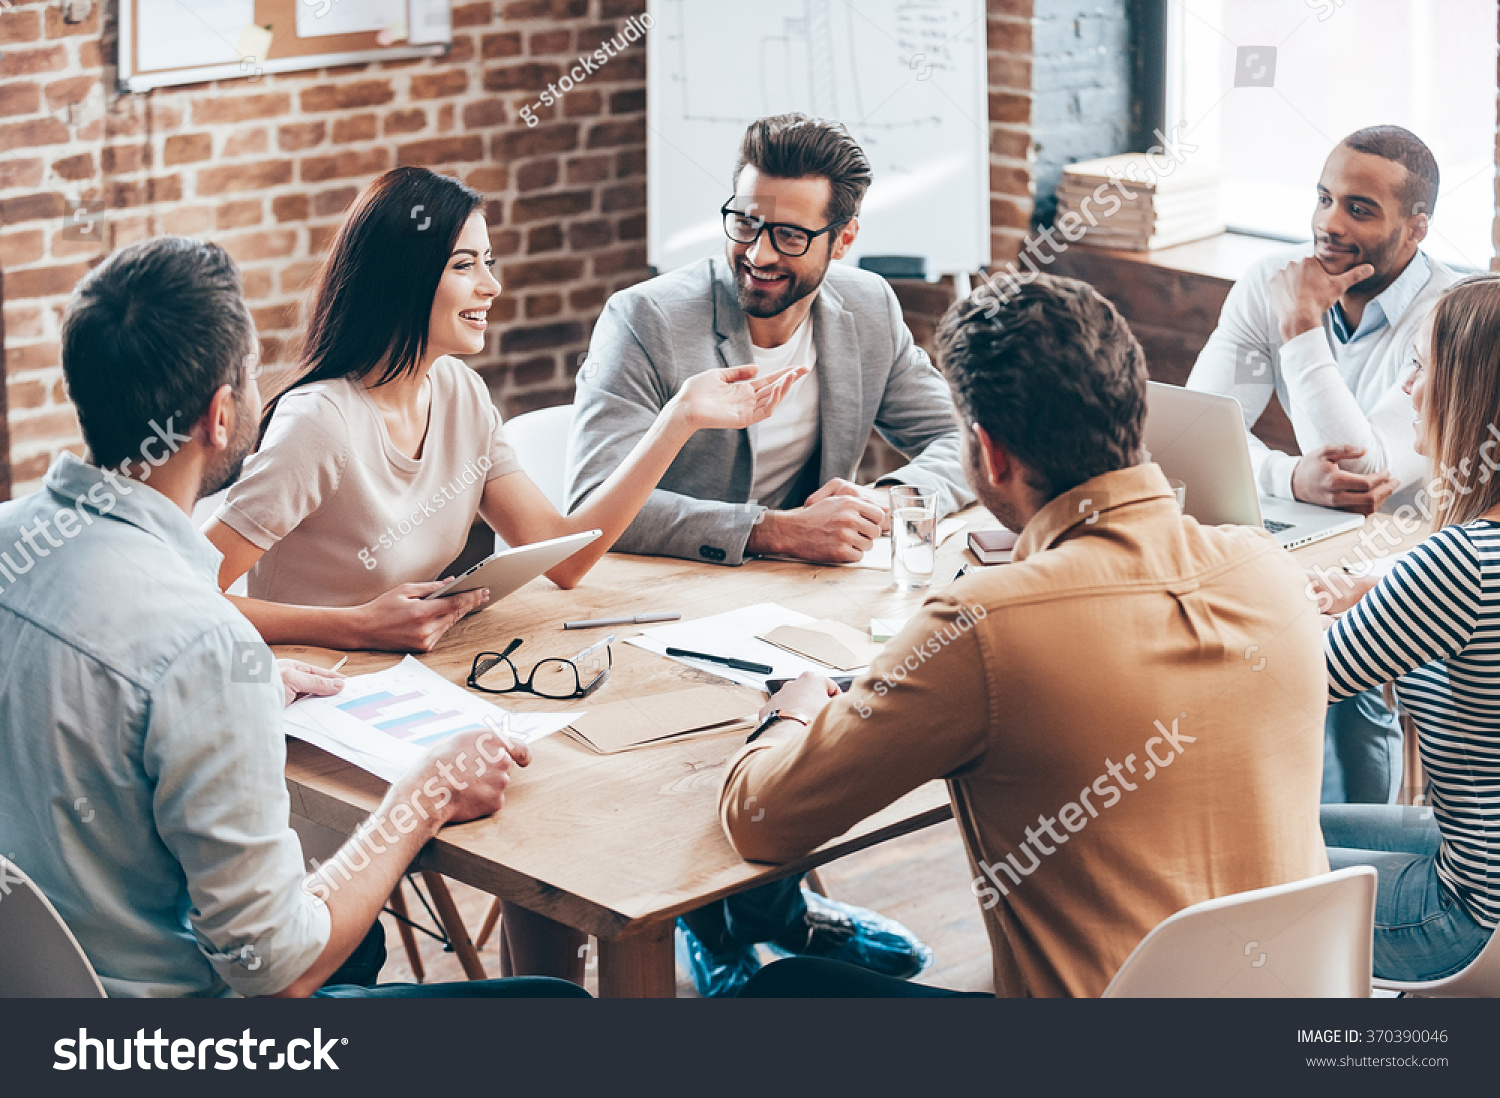 Making great decisions. Young beautiful woman gesturing and discussing something with smile while her coworkers listening to her sitting at the office table